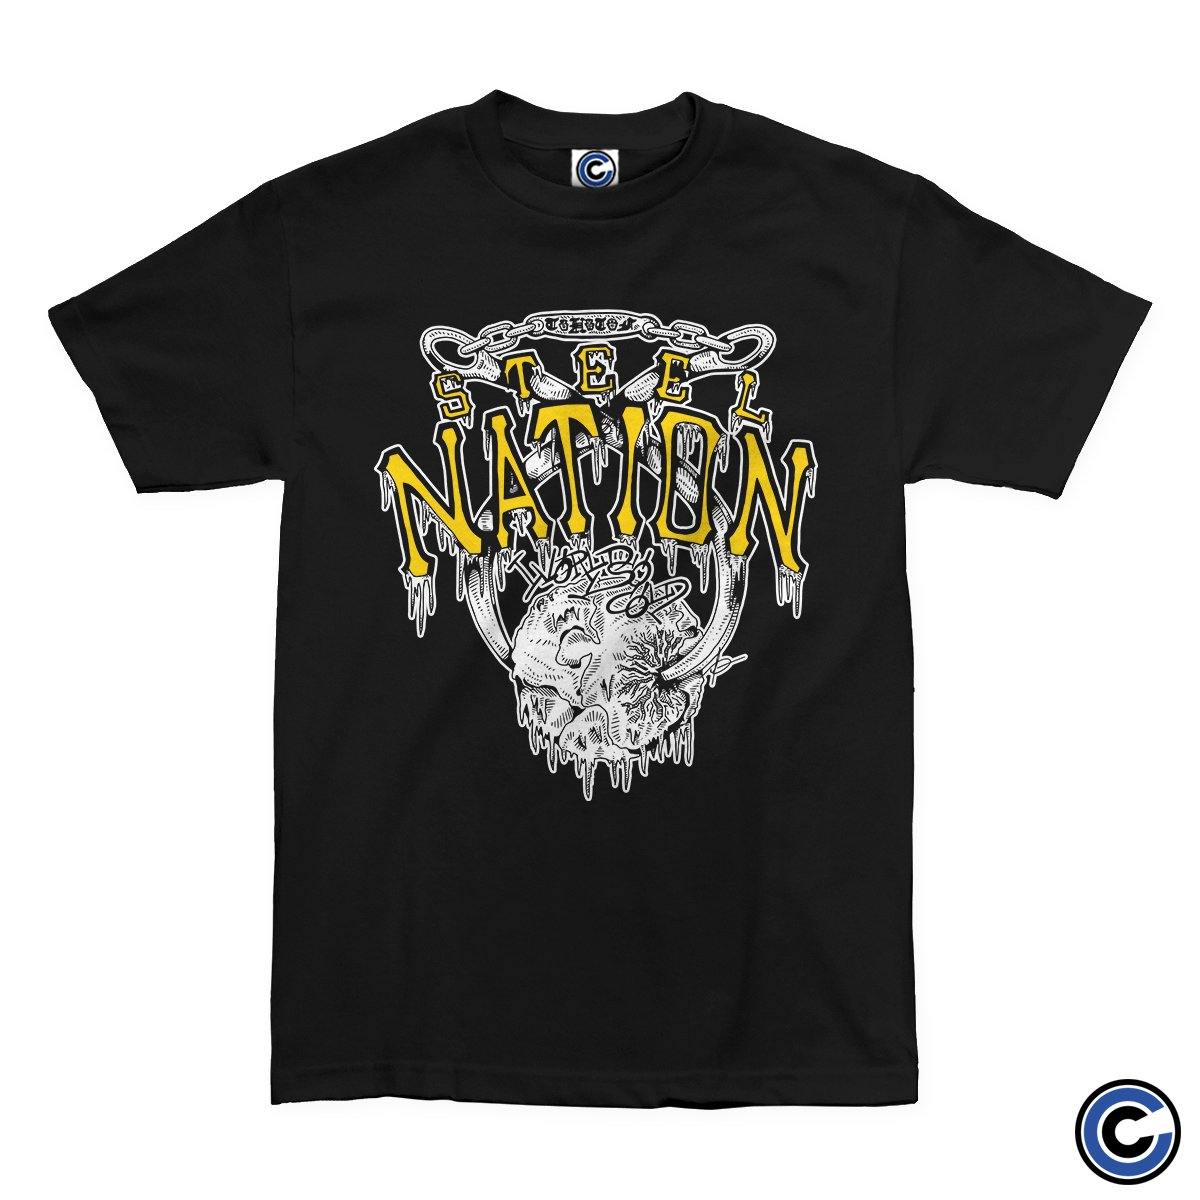 Buy – Steel Nation "So Cold" Shirt – Band & Music Merch – Cold Cuts Merch